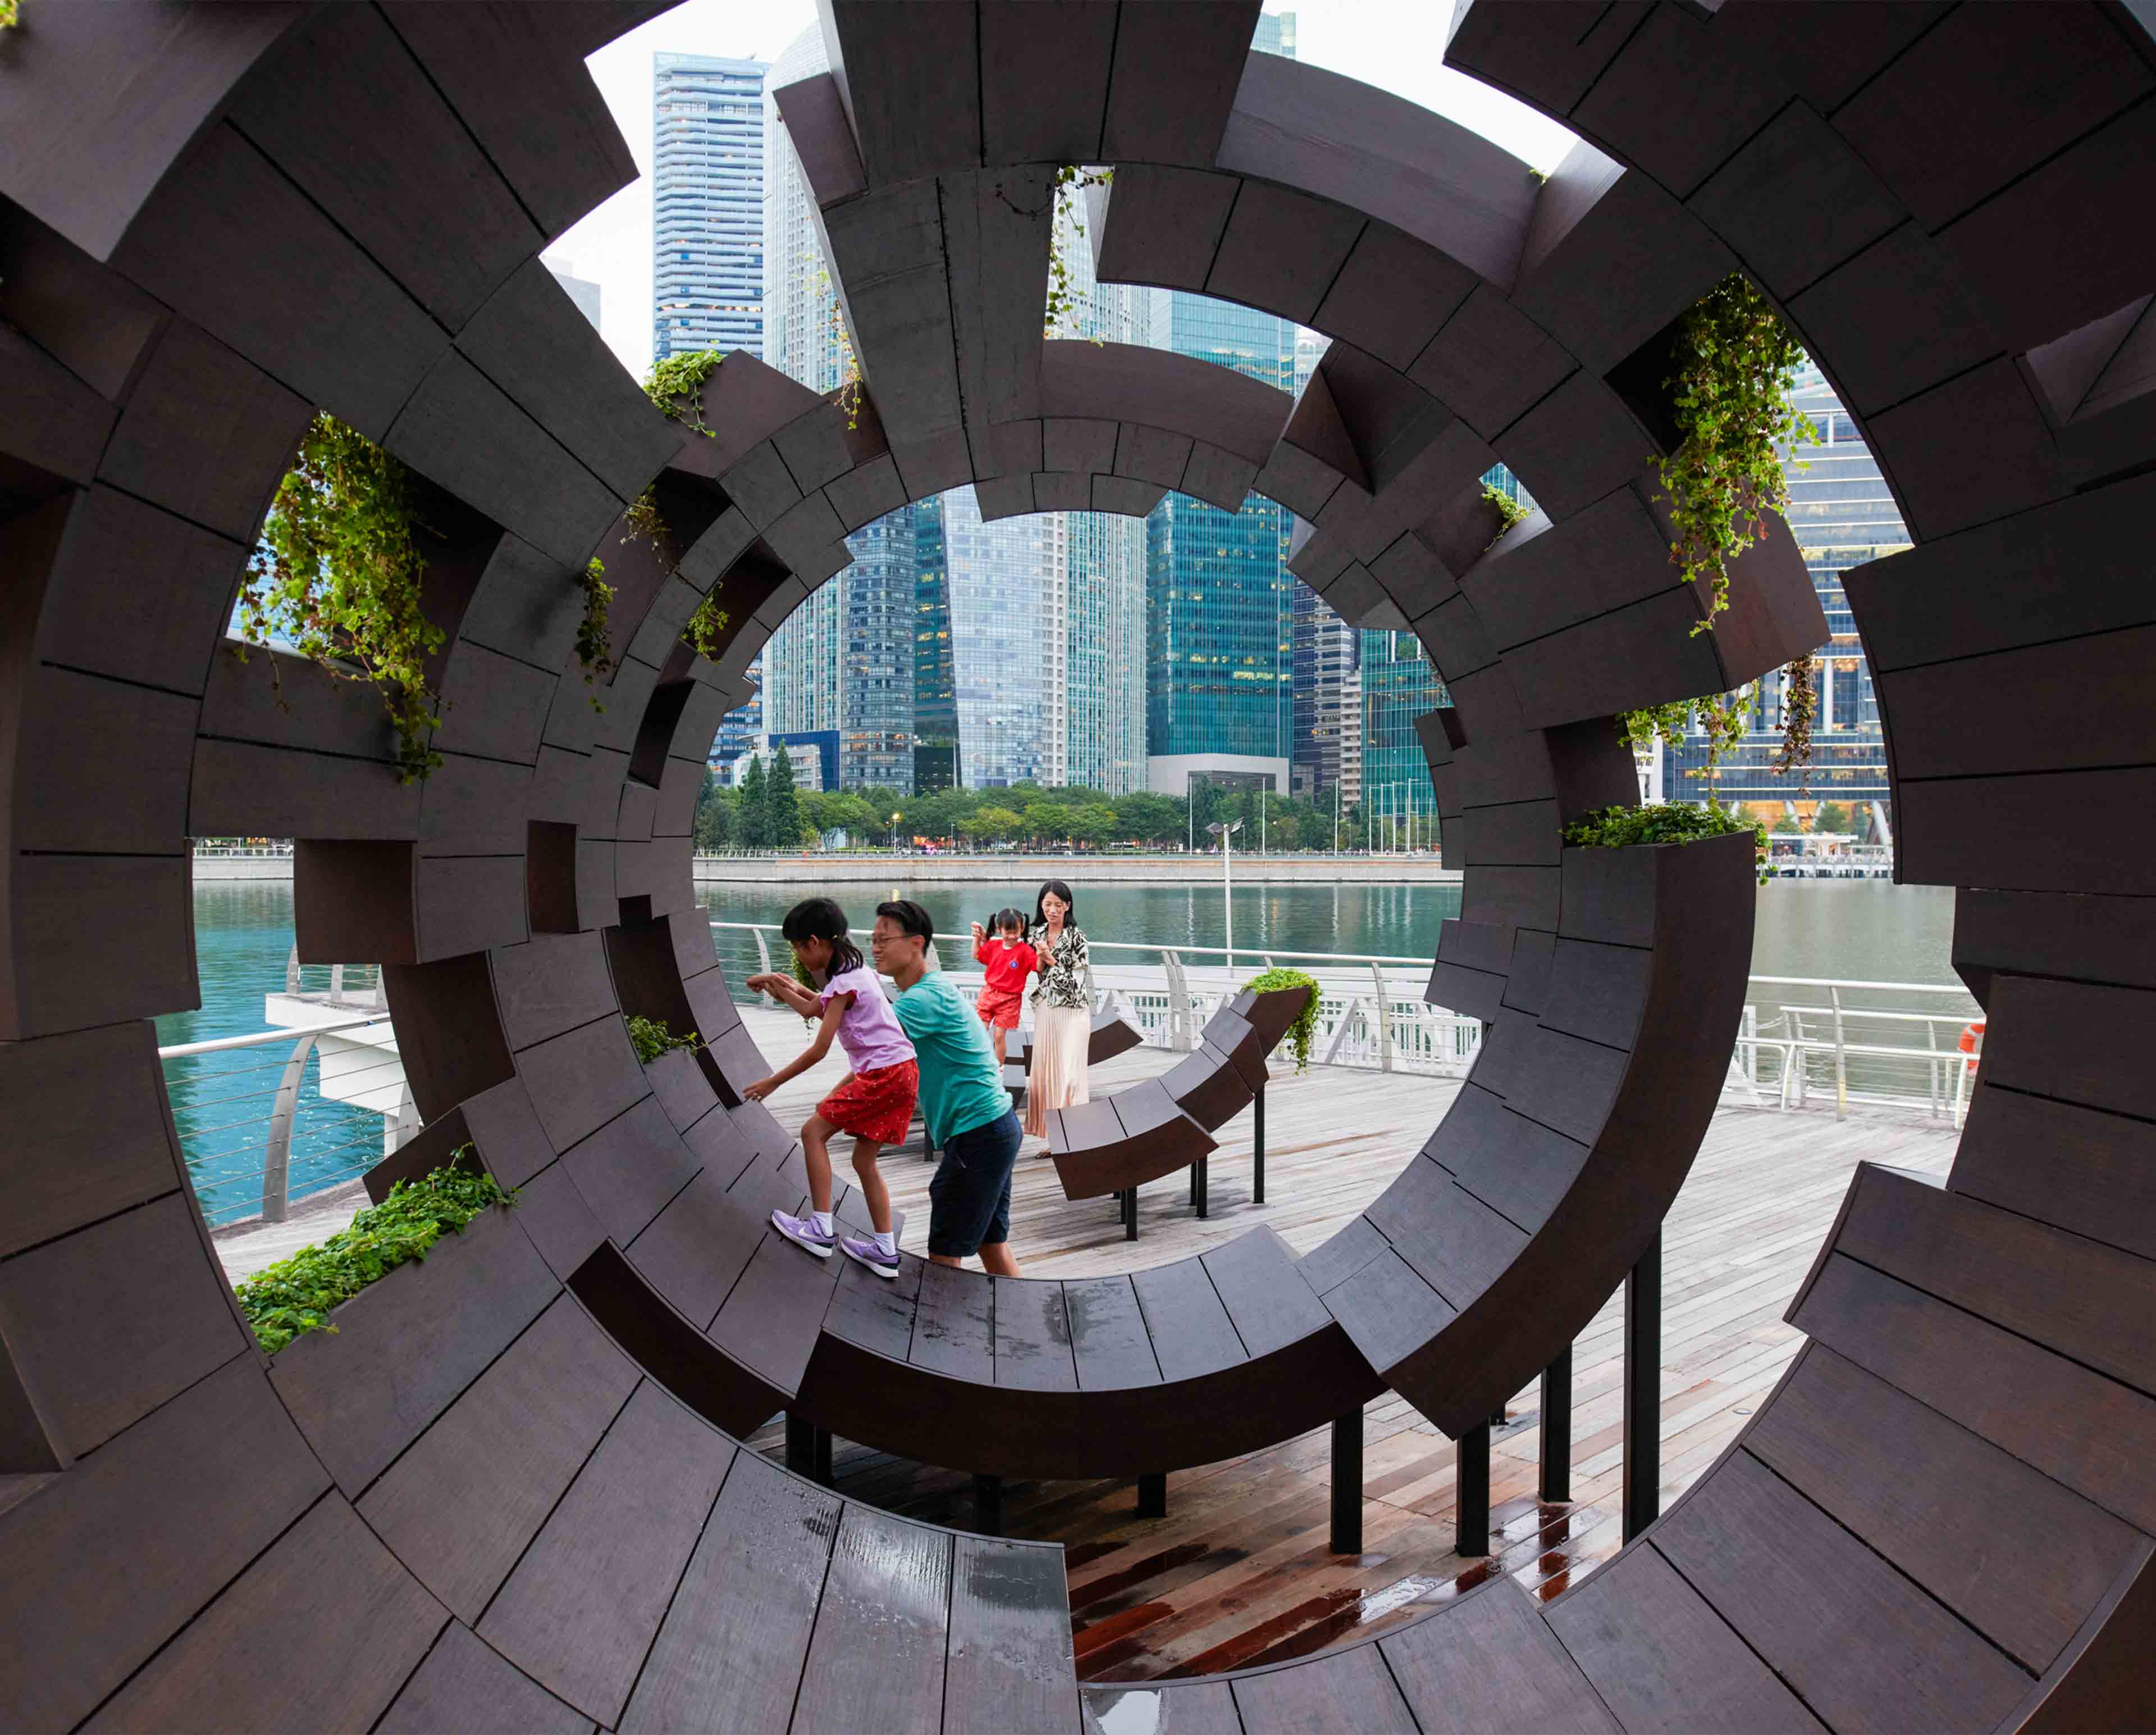 a family and children playing outside on a tubular architectural piece